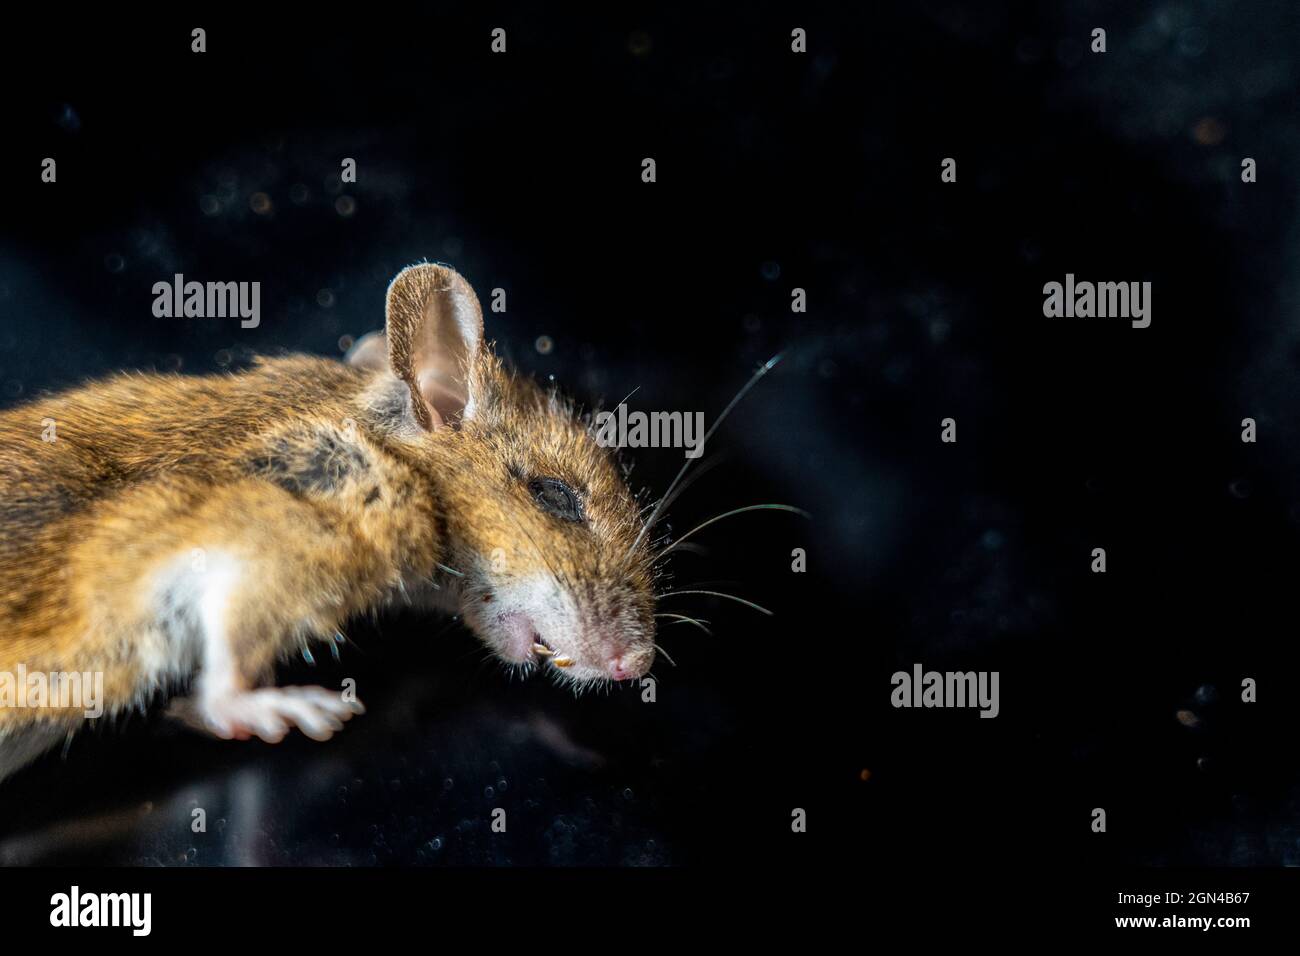 https://c8.alamy.com/comp/2GN4B67/dead-mouse-after-being-caught-in-a-mouse-trap-2GN4B67.jpg